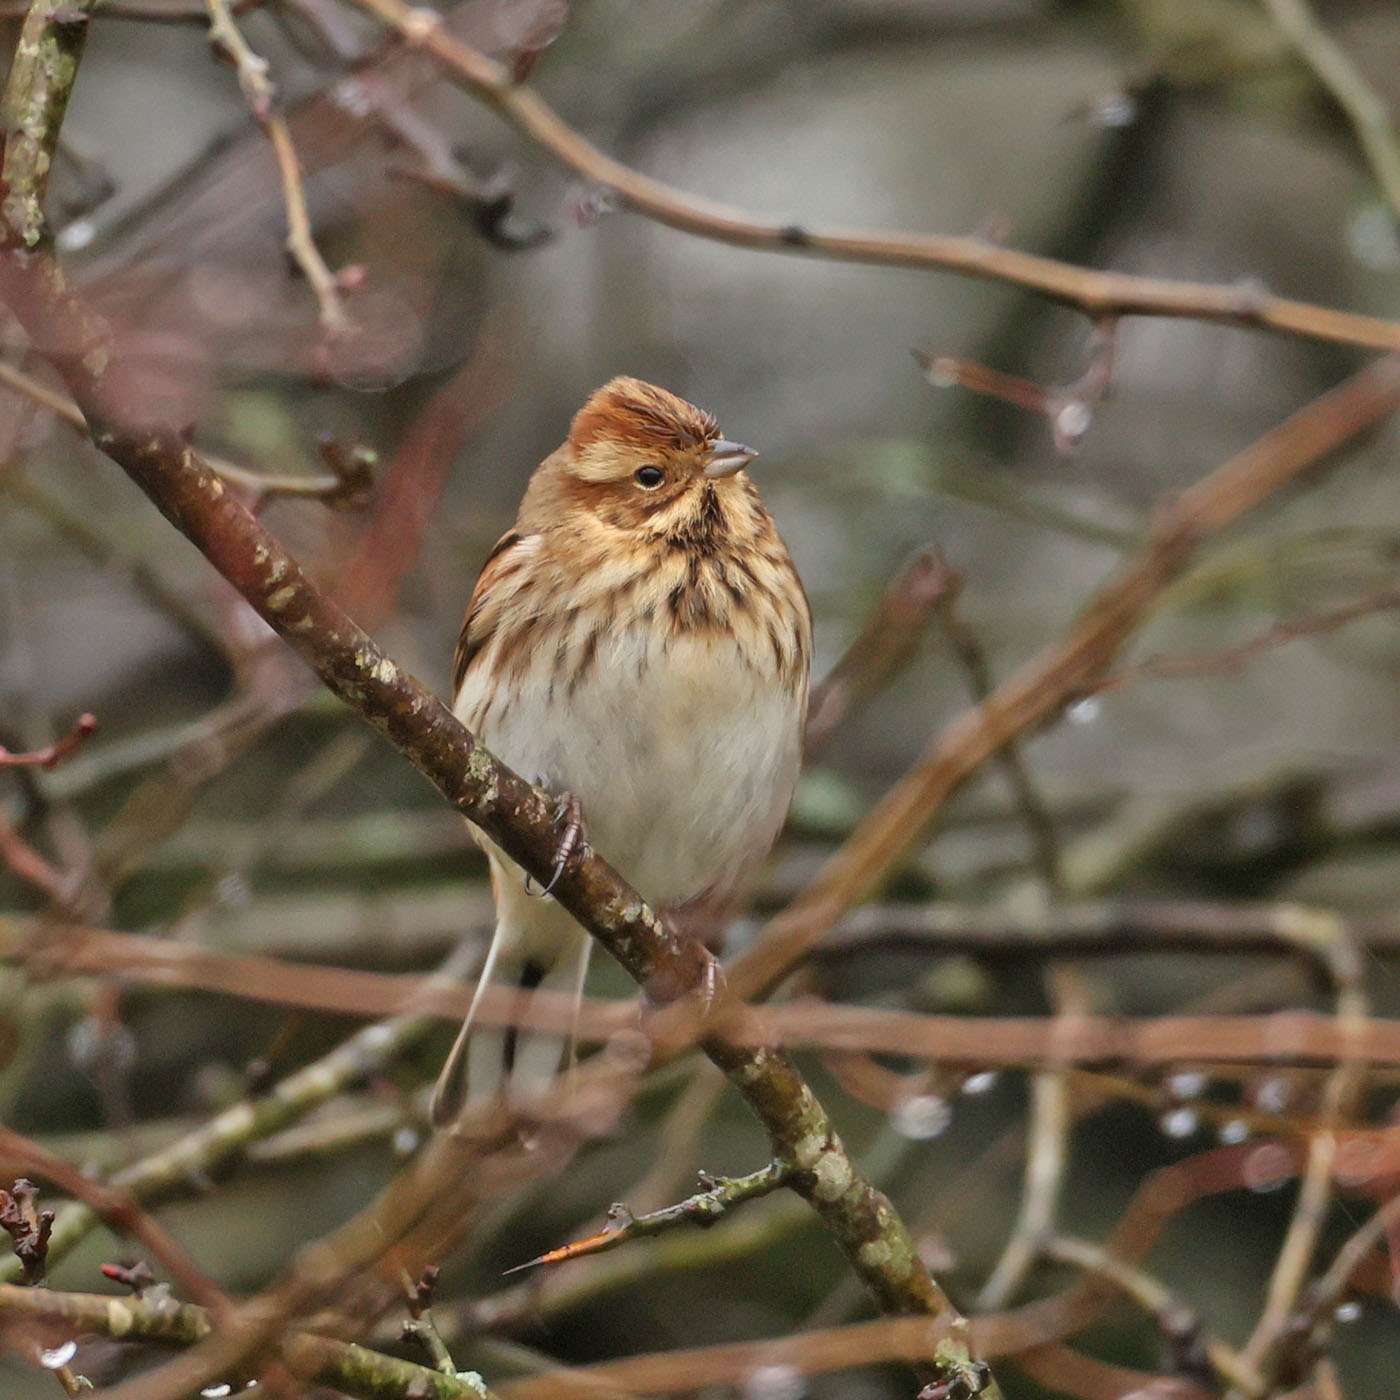 Reed Bunting by Steve Hopper at South Brent